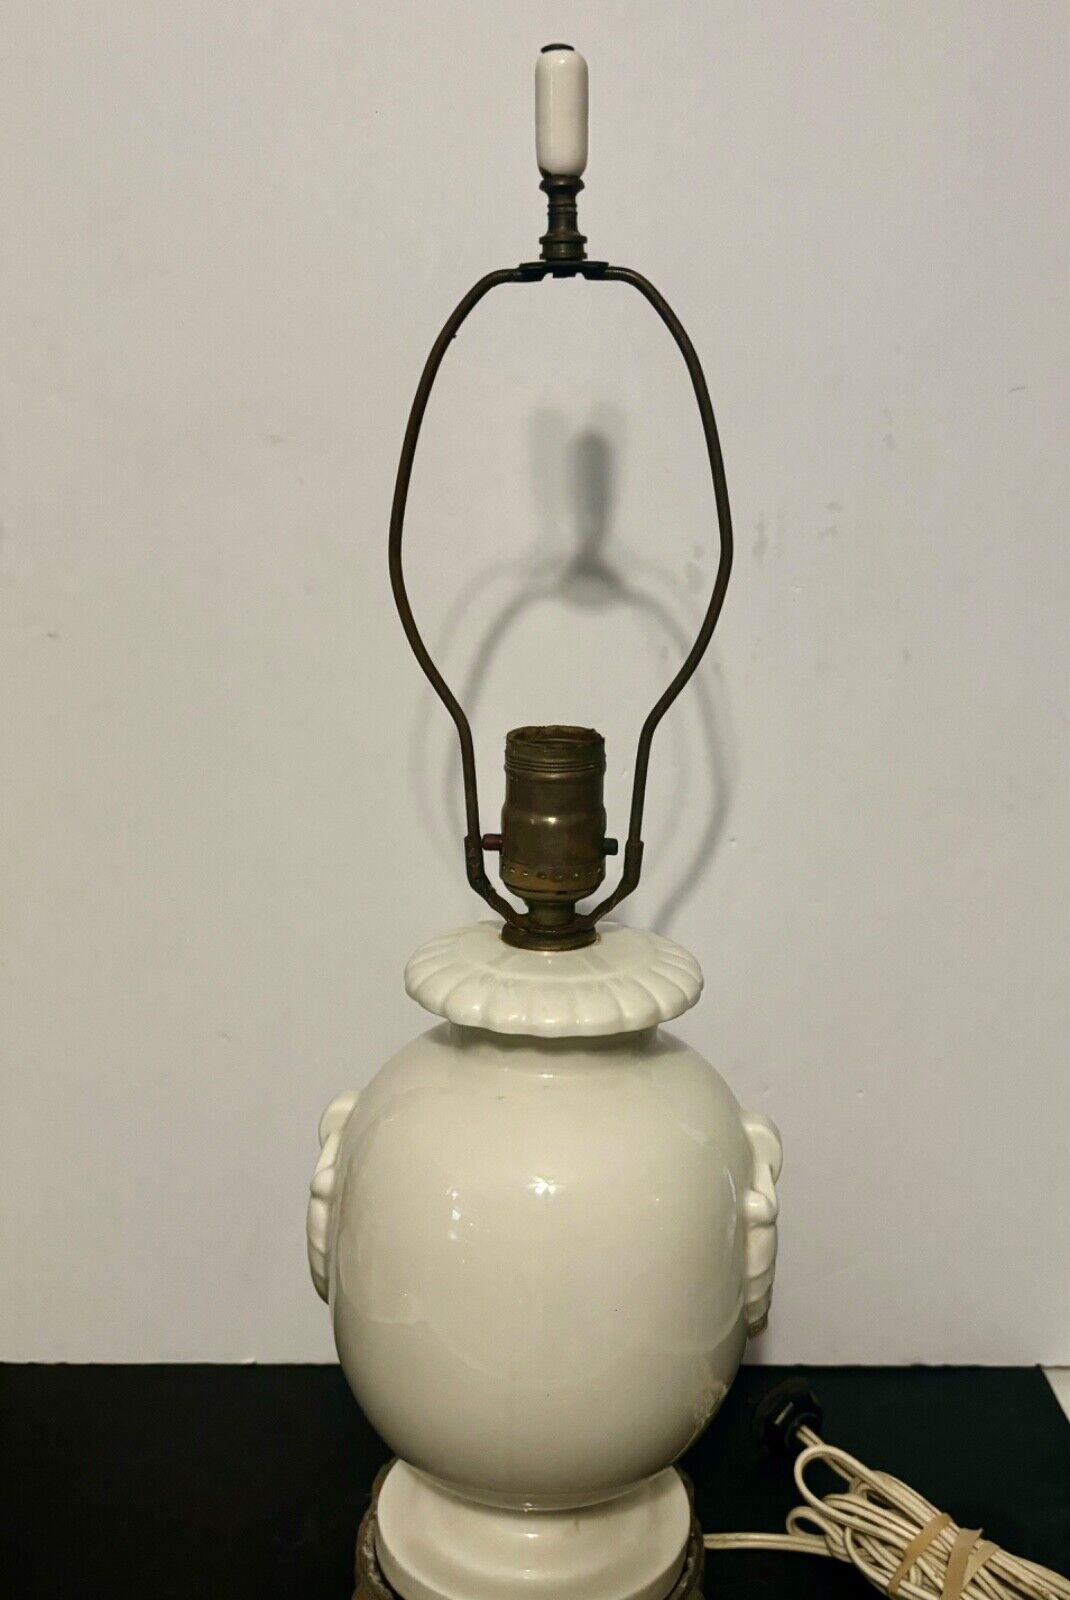 Circa 1940's French porcelain lamp with leaf pattern on body and metal bases.